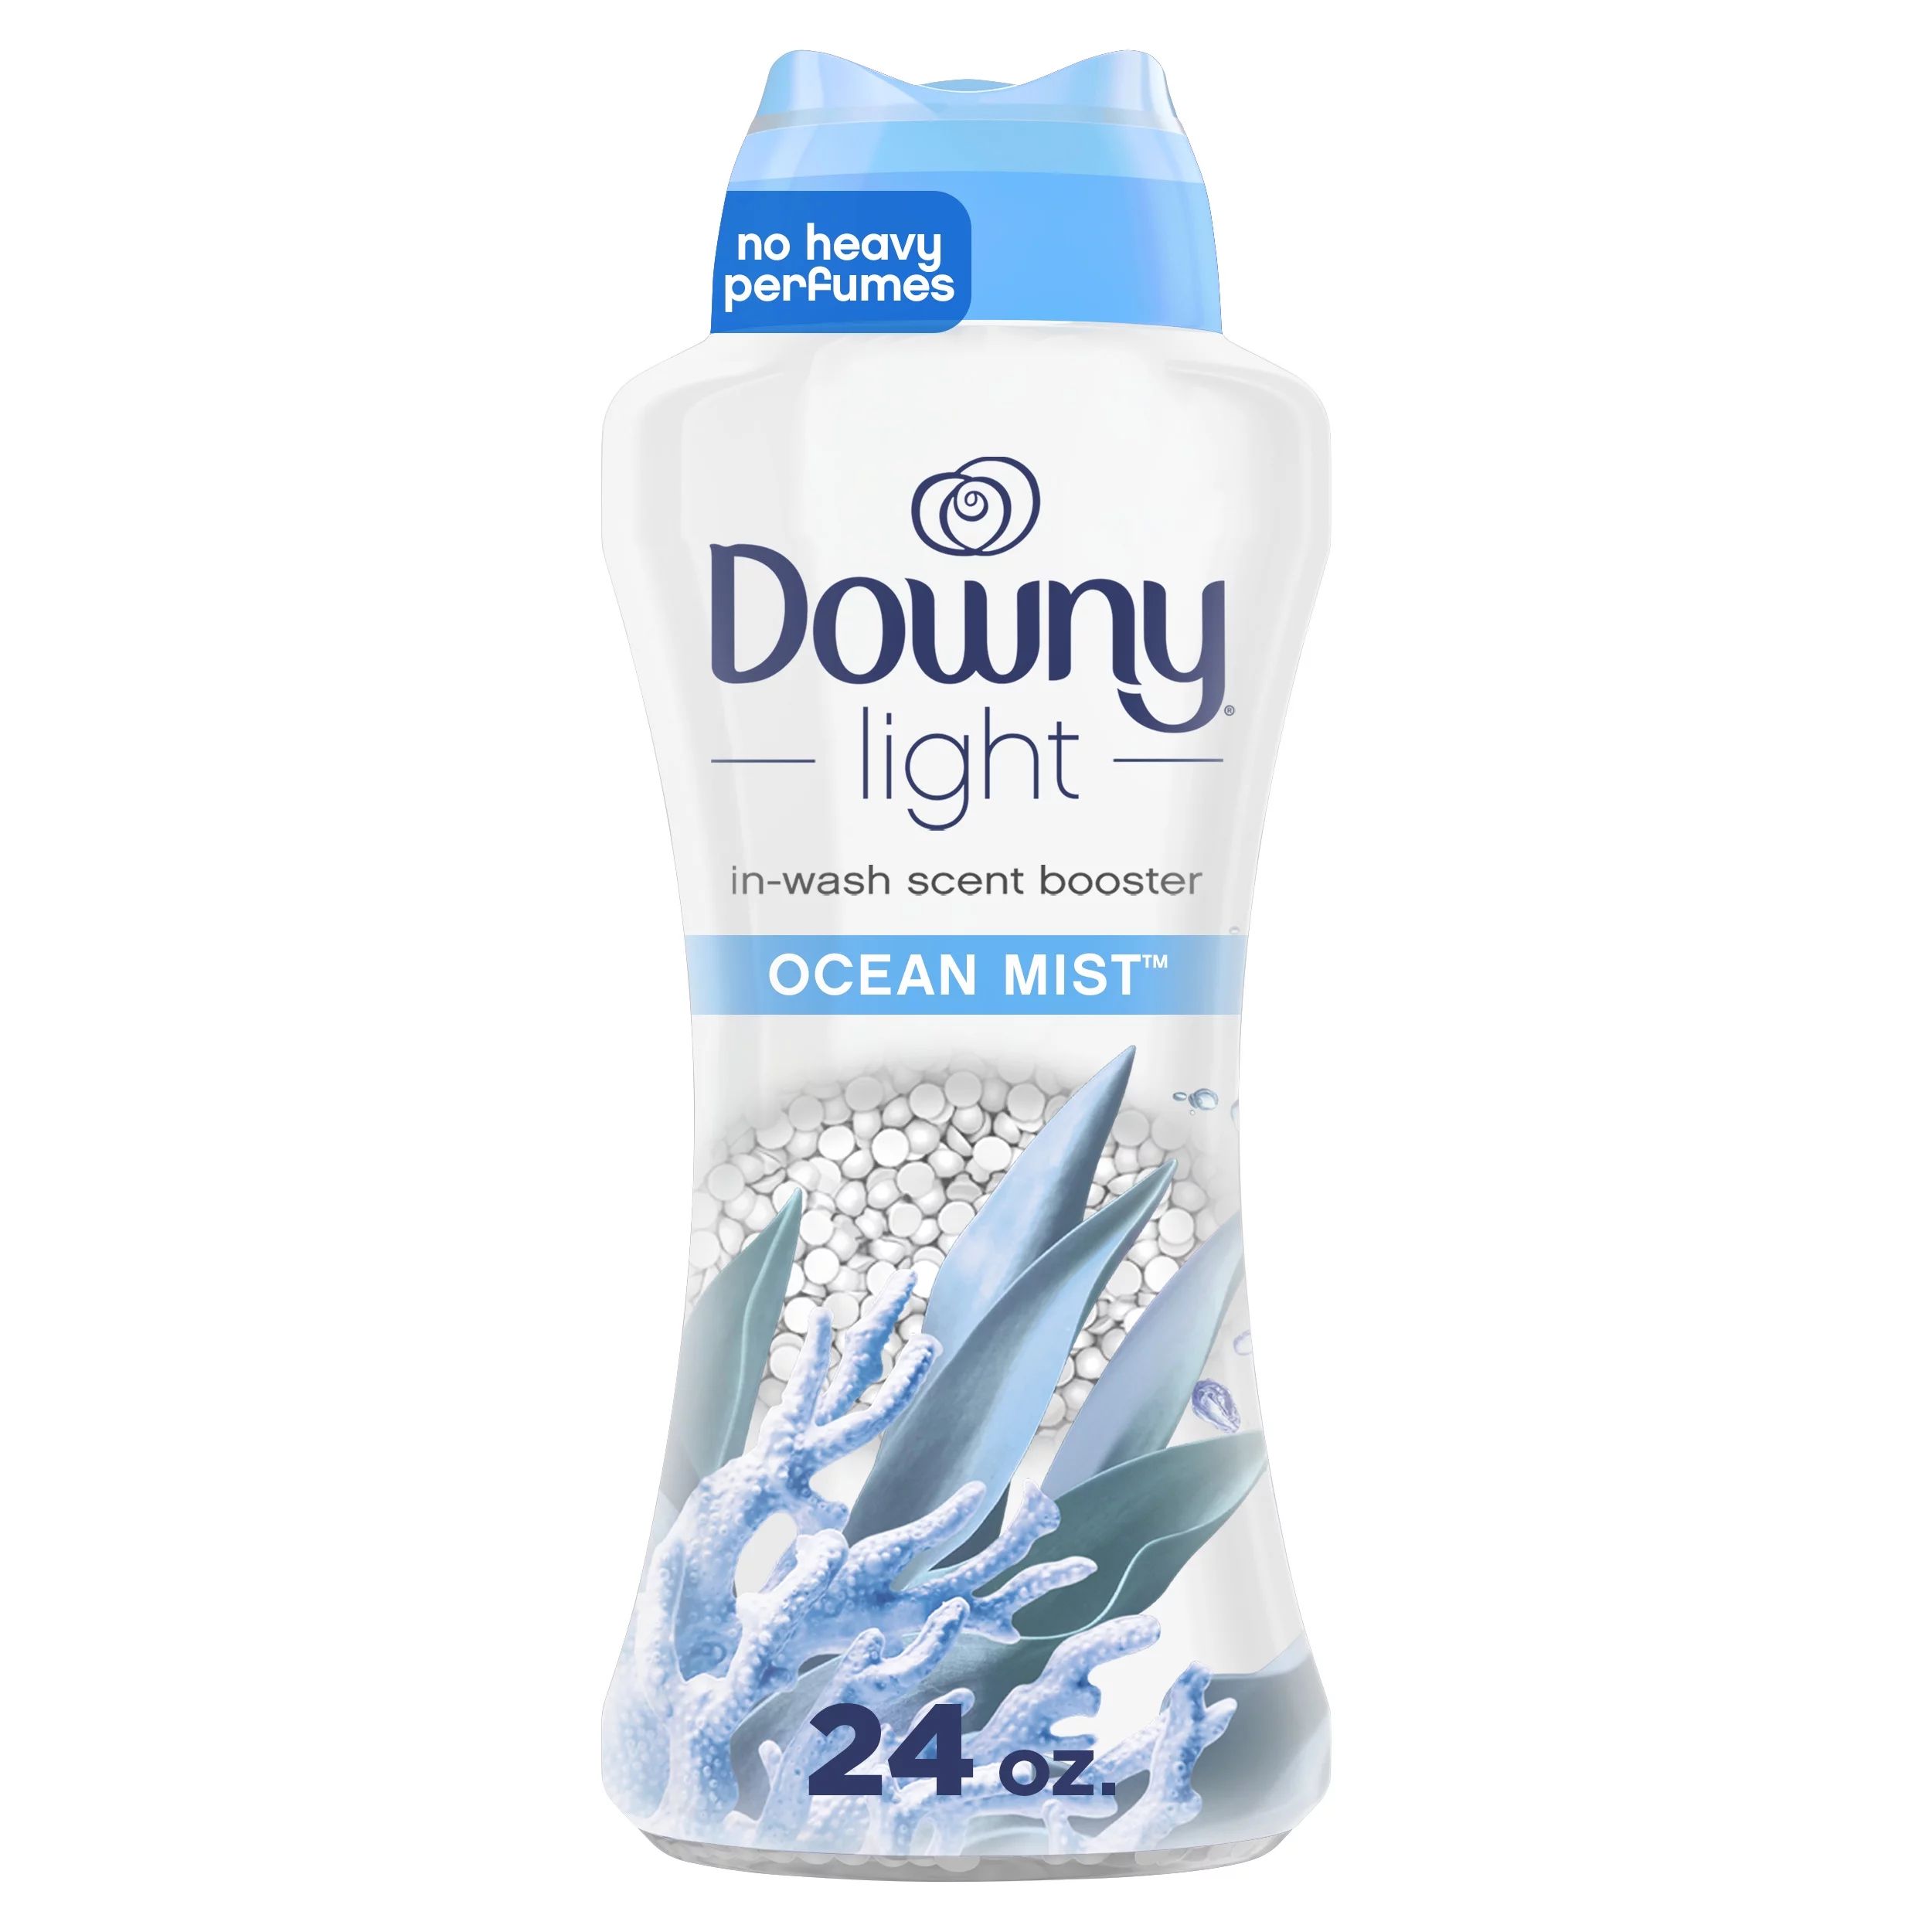 Downy Light Laundry Scent Booster Beads for Washer, Ocean Mist, 24 oz, with No Heavy Perfumes | Walmart (US)